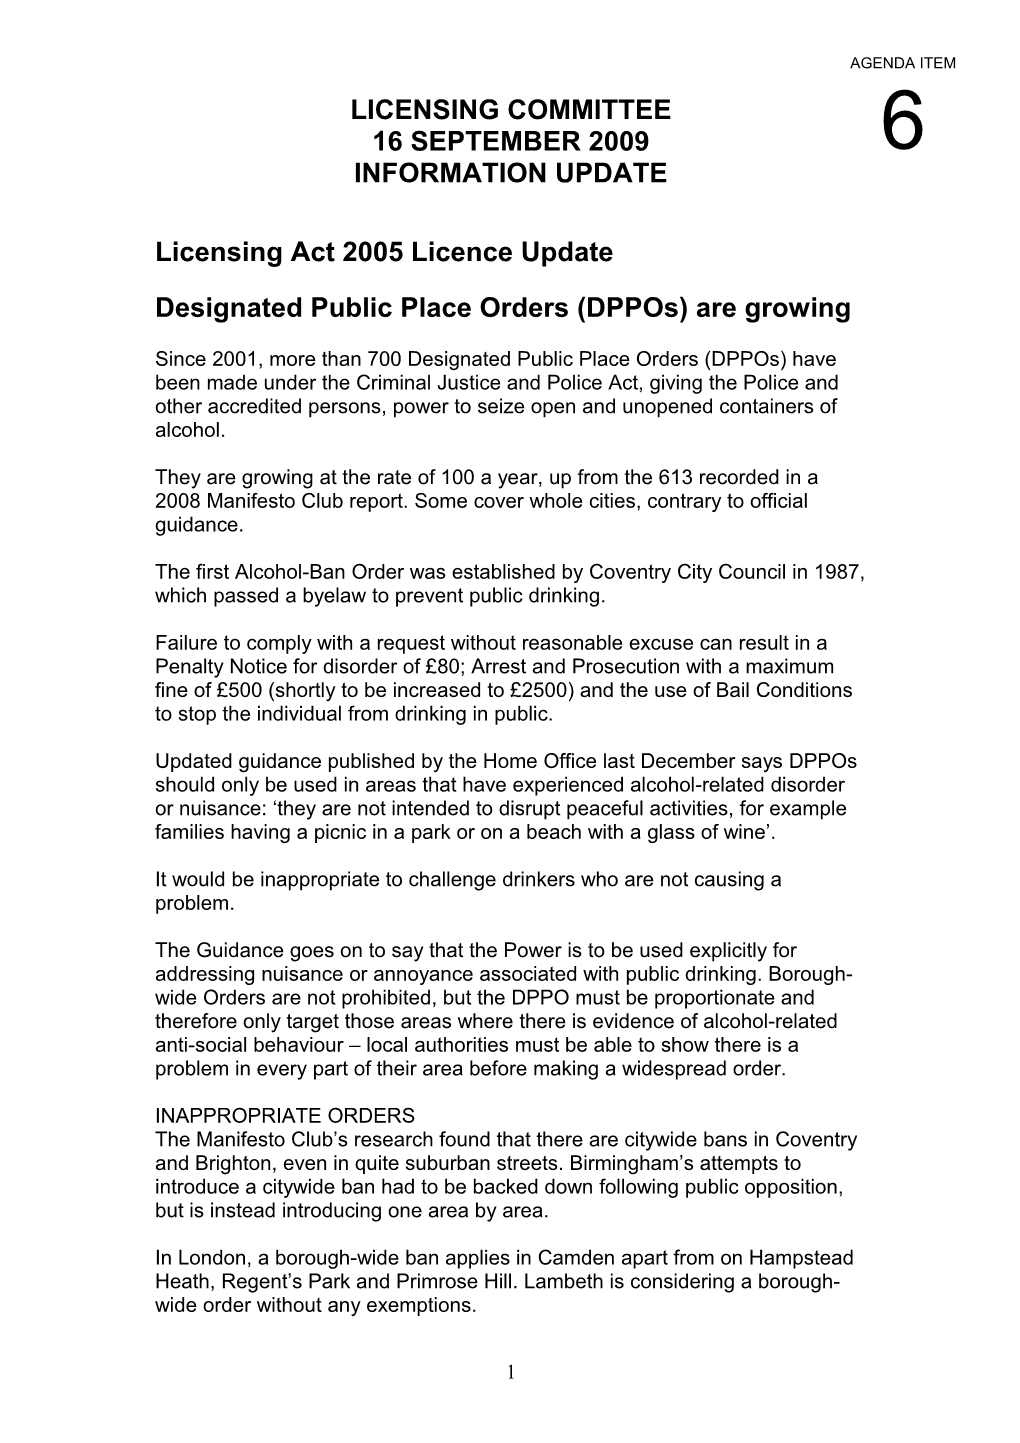 Licensing Act 2005 Licence Update